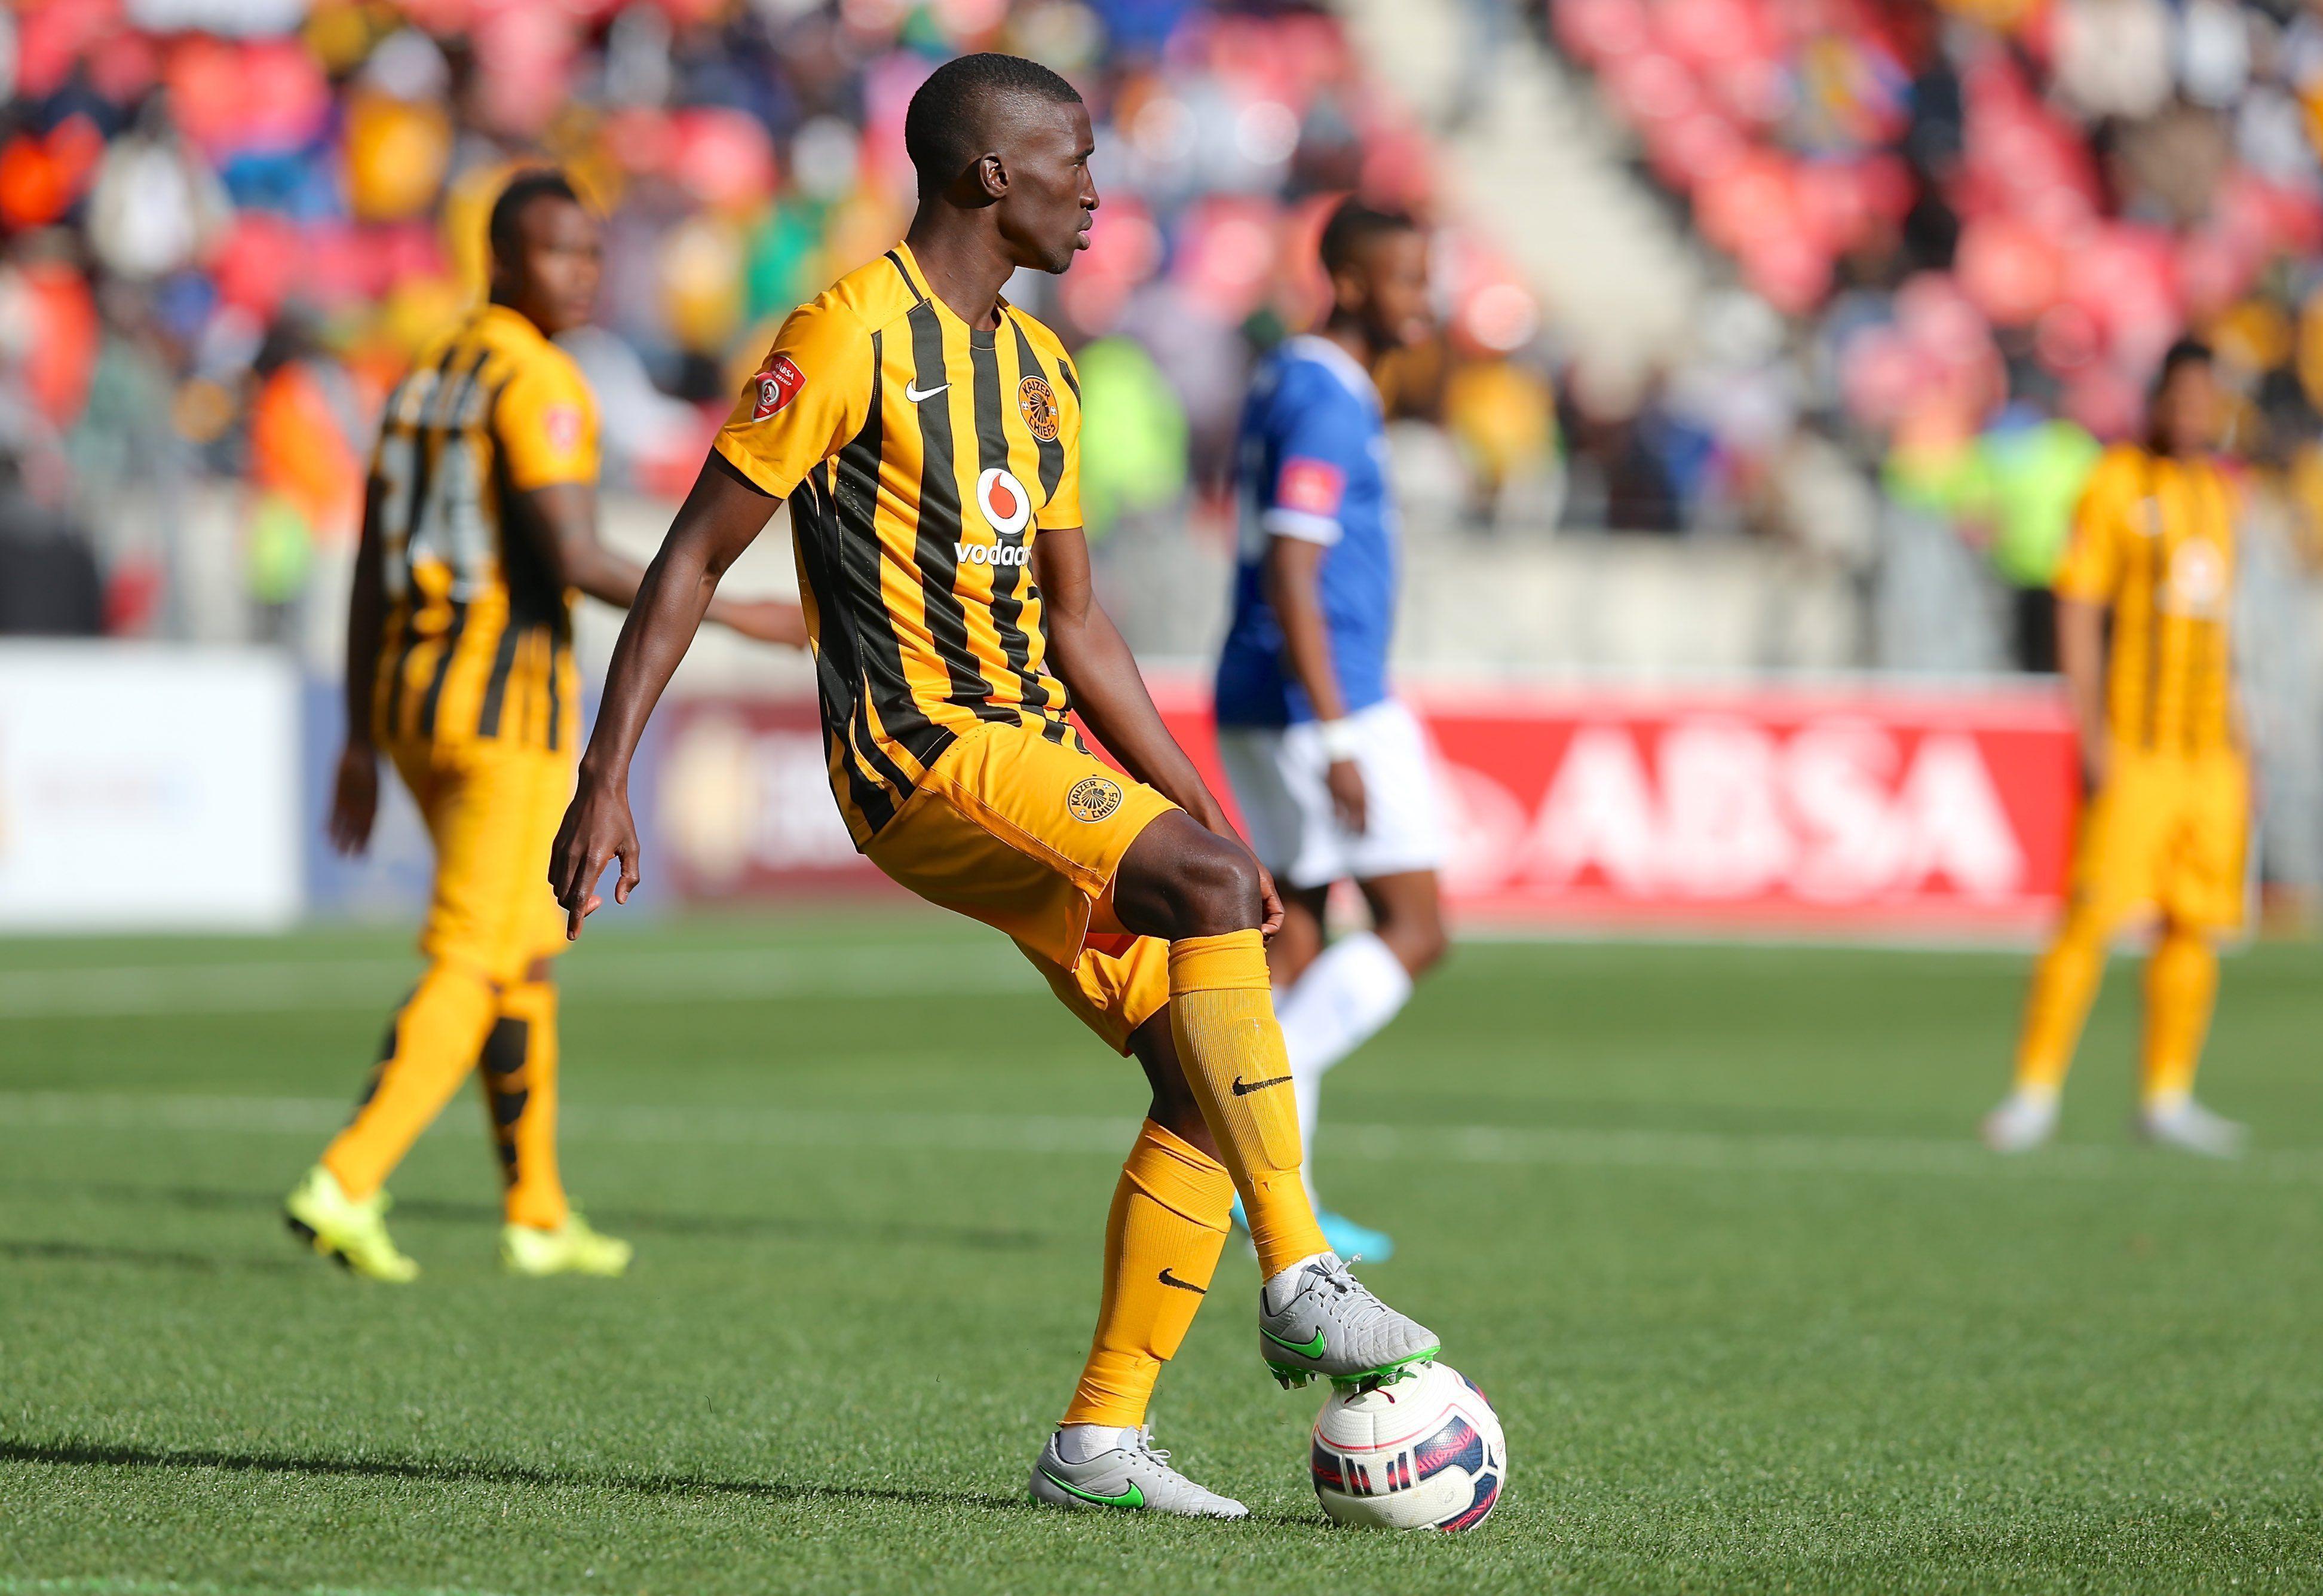 Cape Town City register interest in 'departing' Kaizer Chiefs